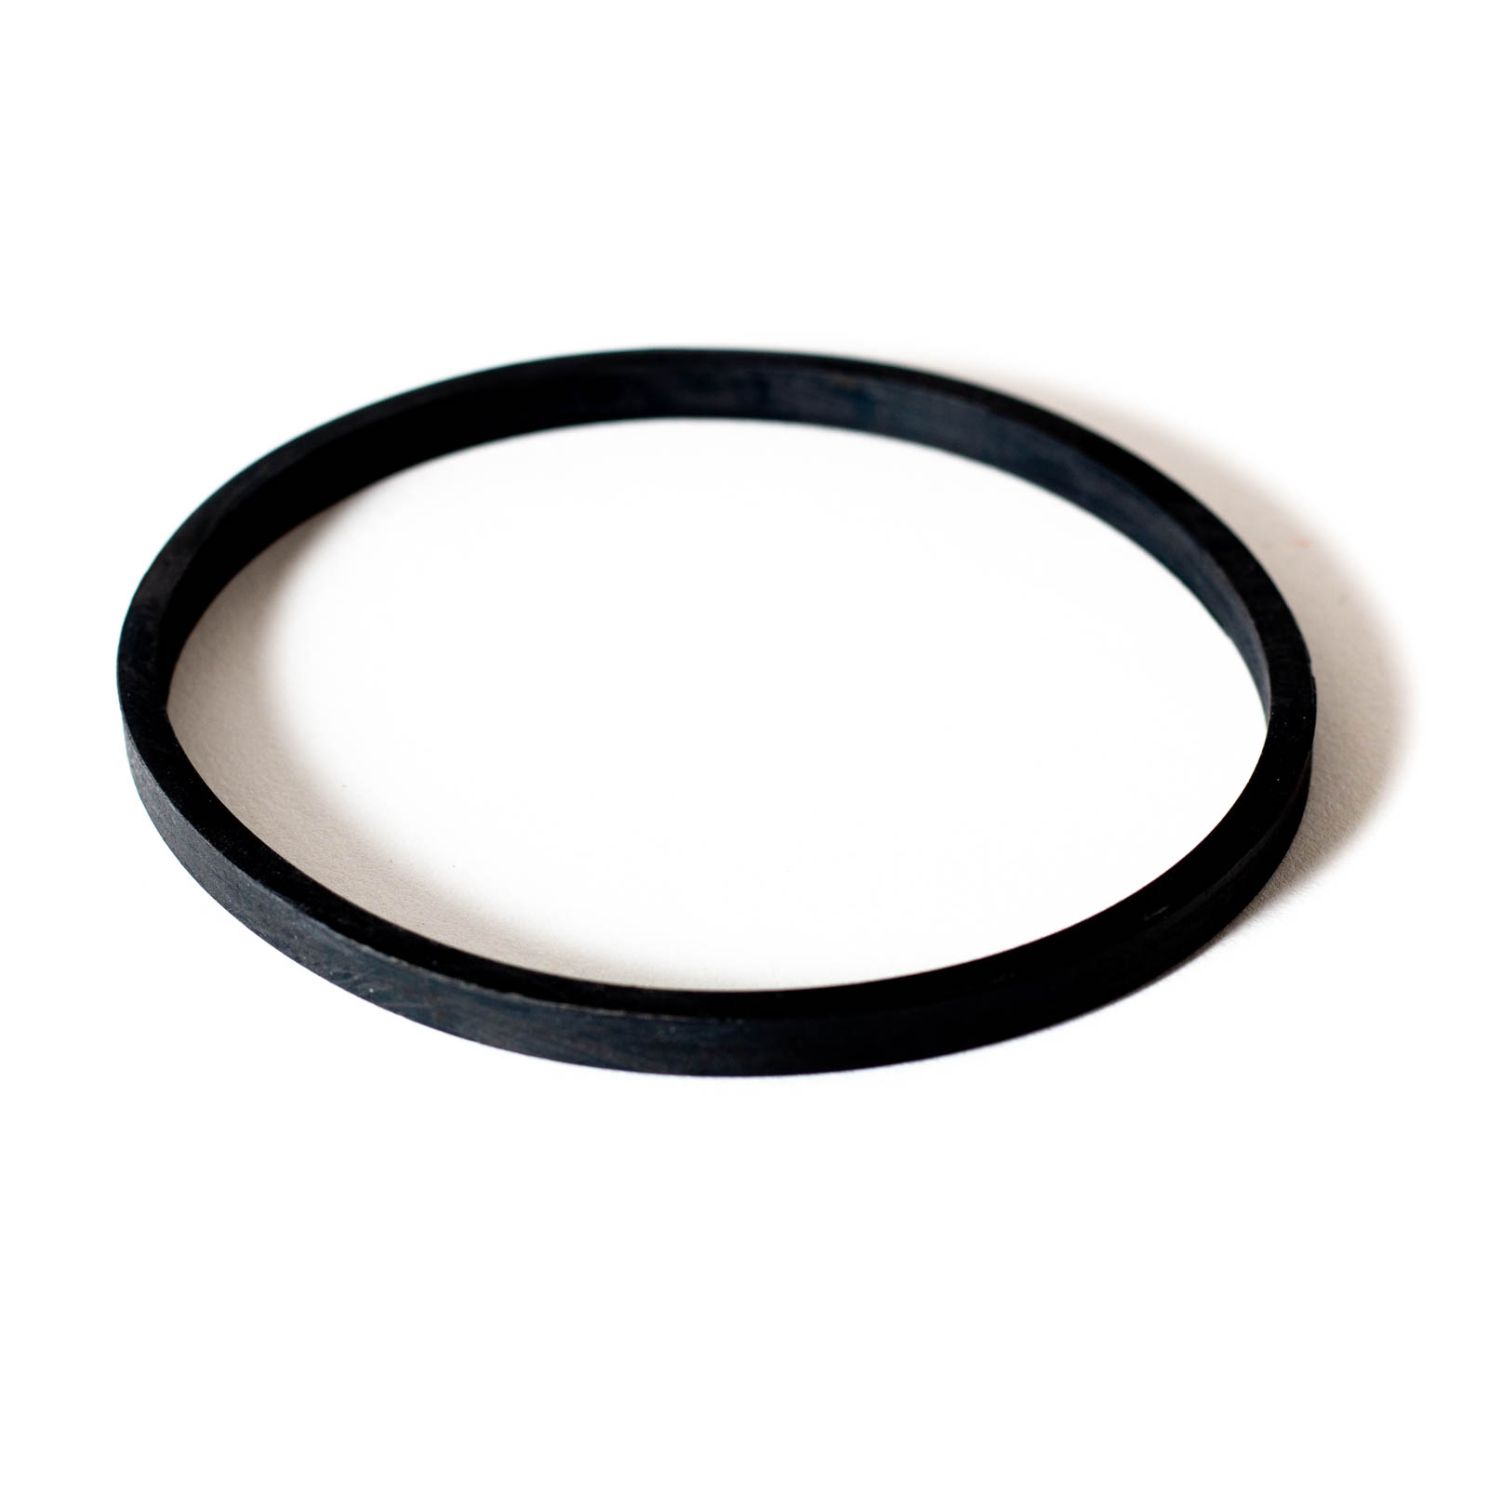 Norwesco Rubber Gasket for 1-1/2'' & 2'' Y Strainer